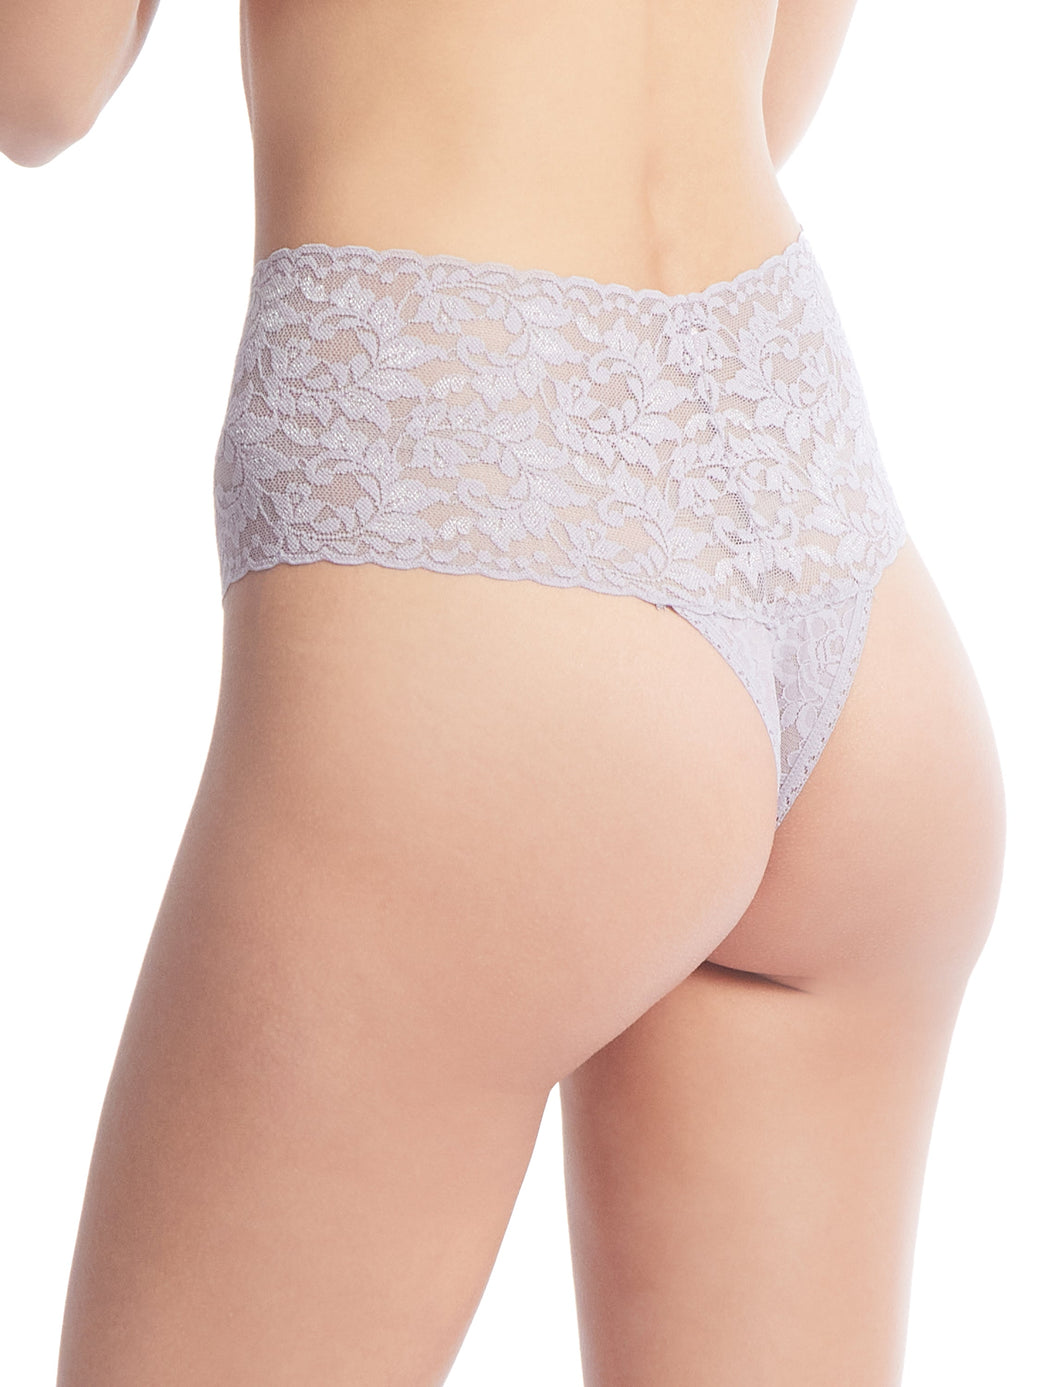 Retro Lace Thong Steel Grey Sale